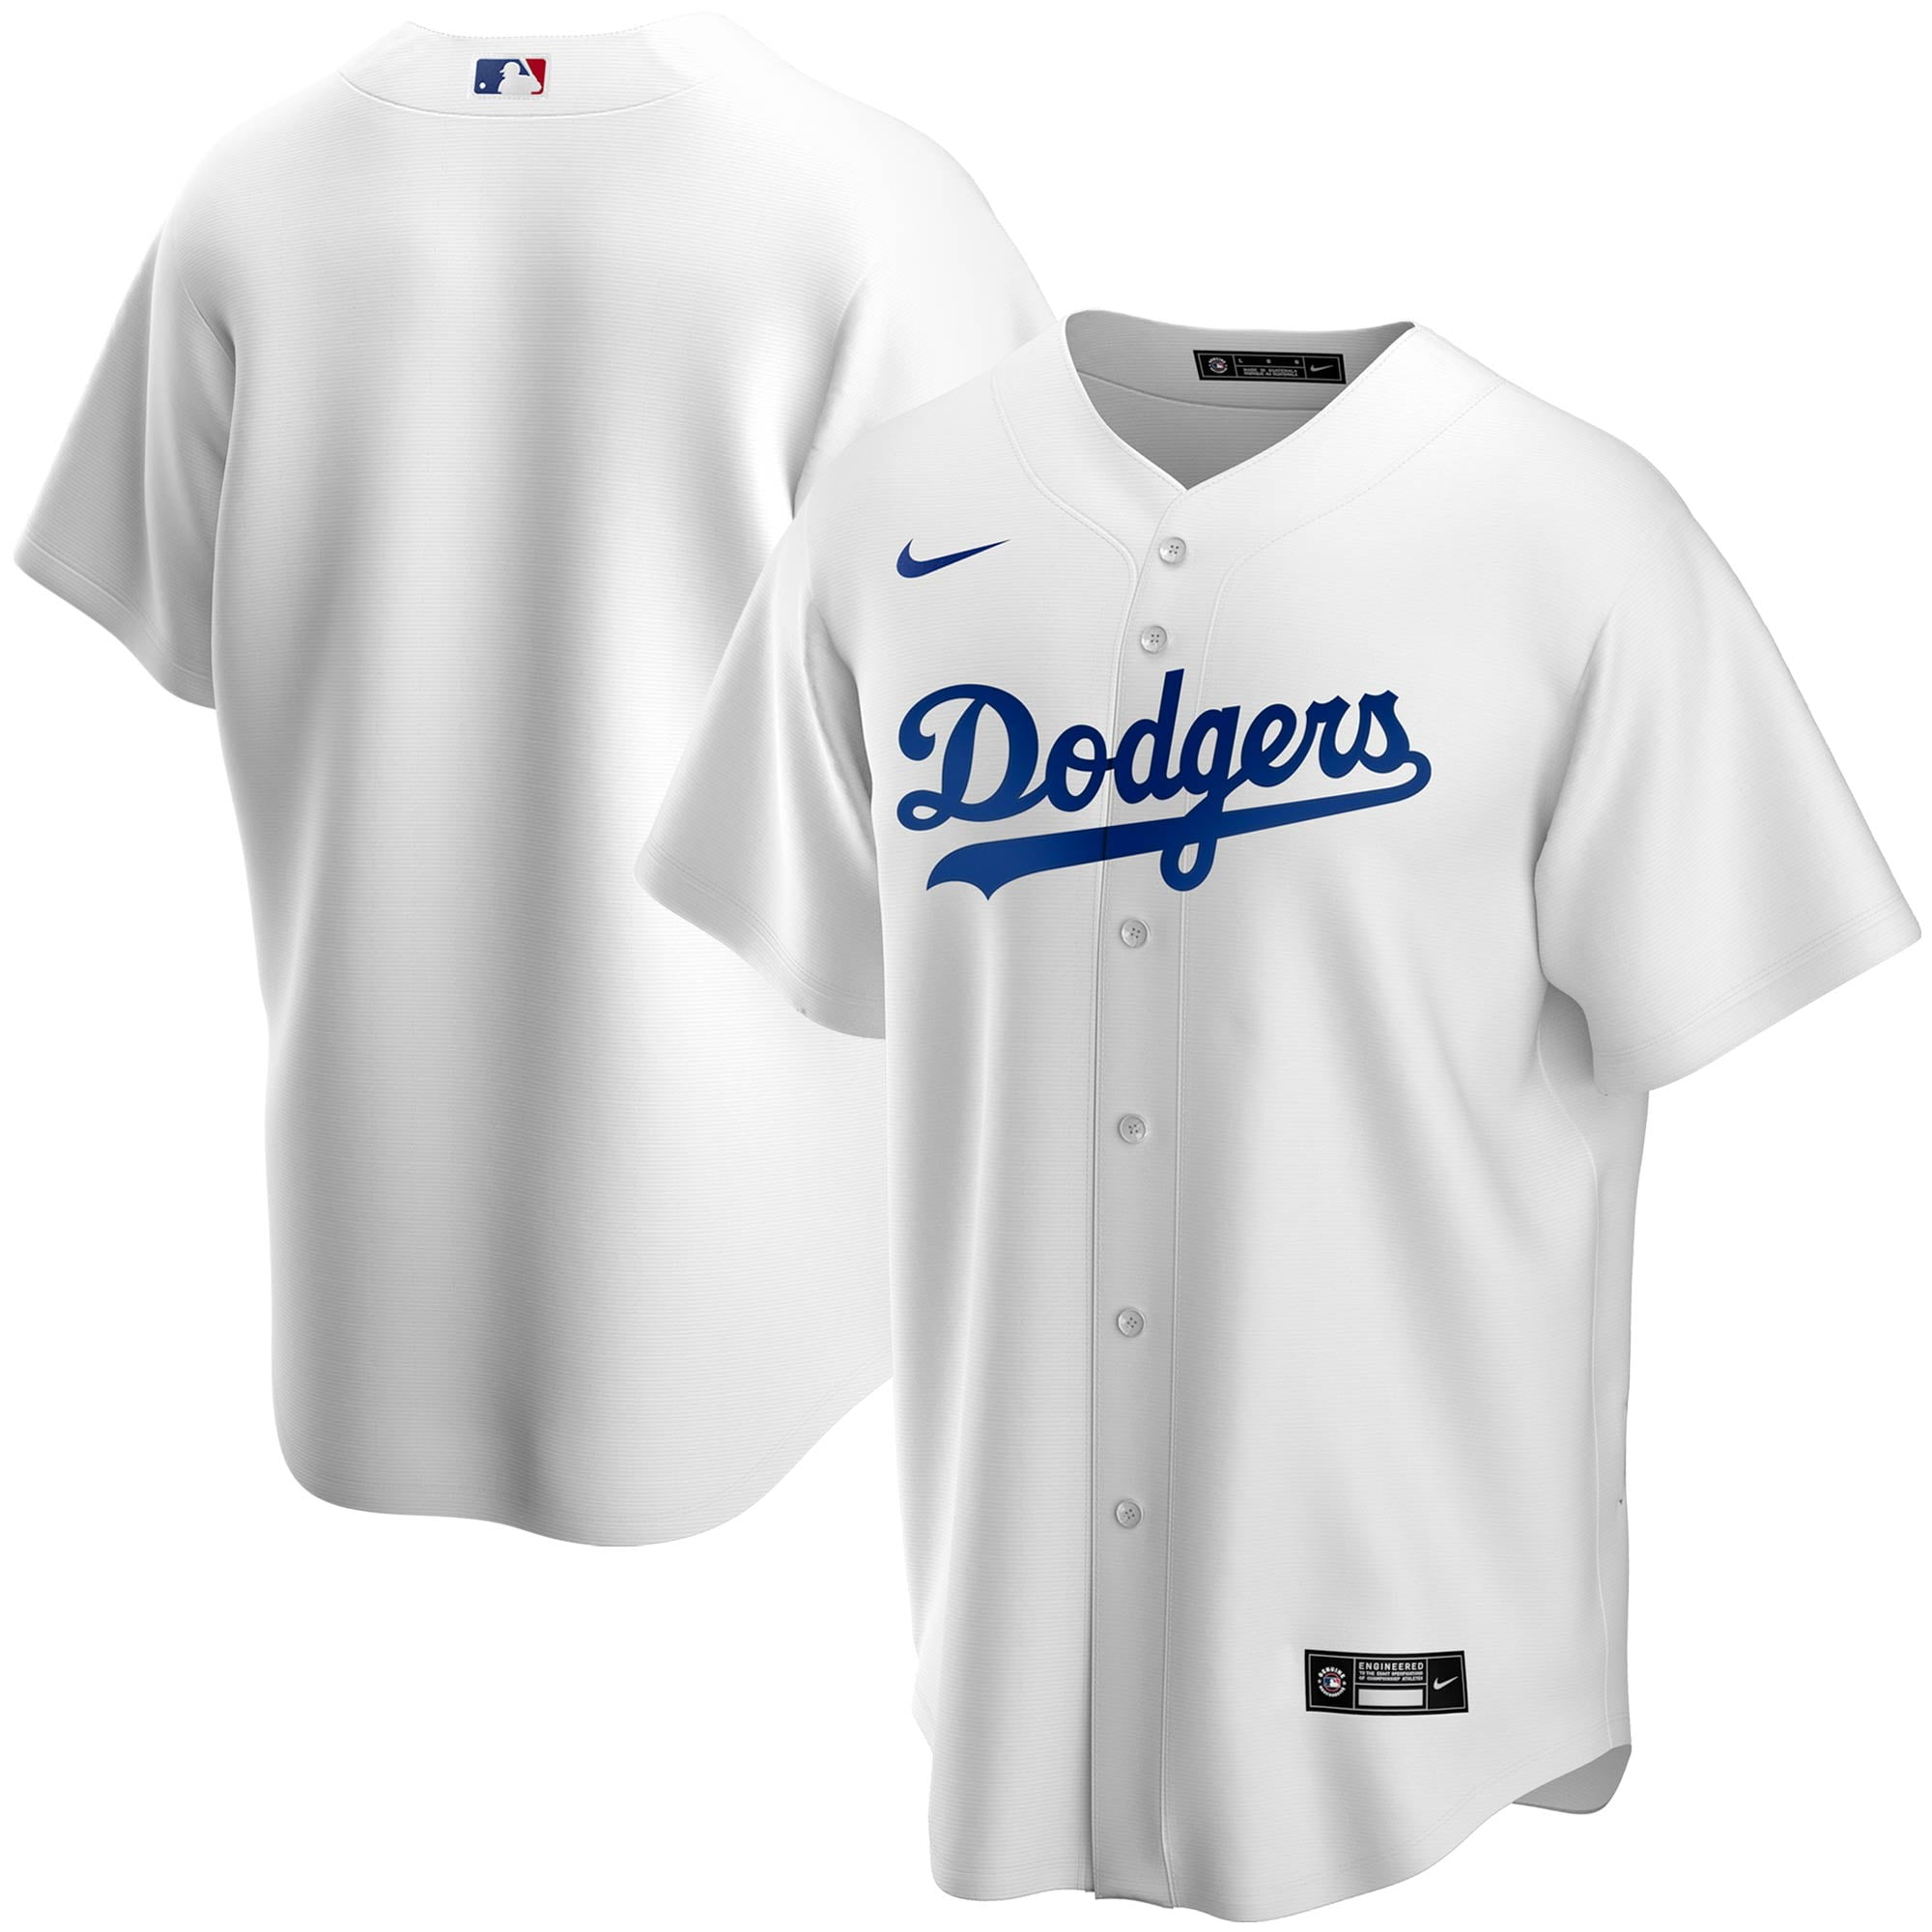 dodgers free jersey day